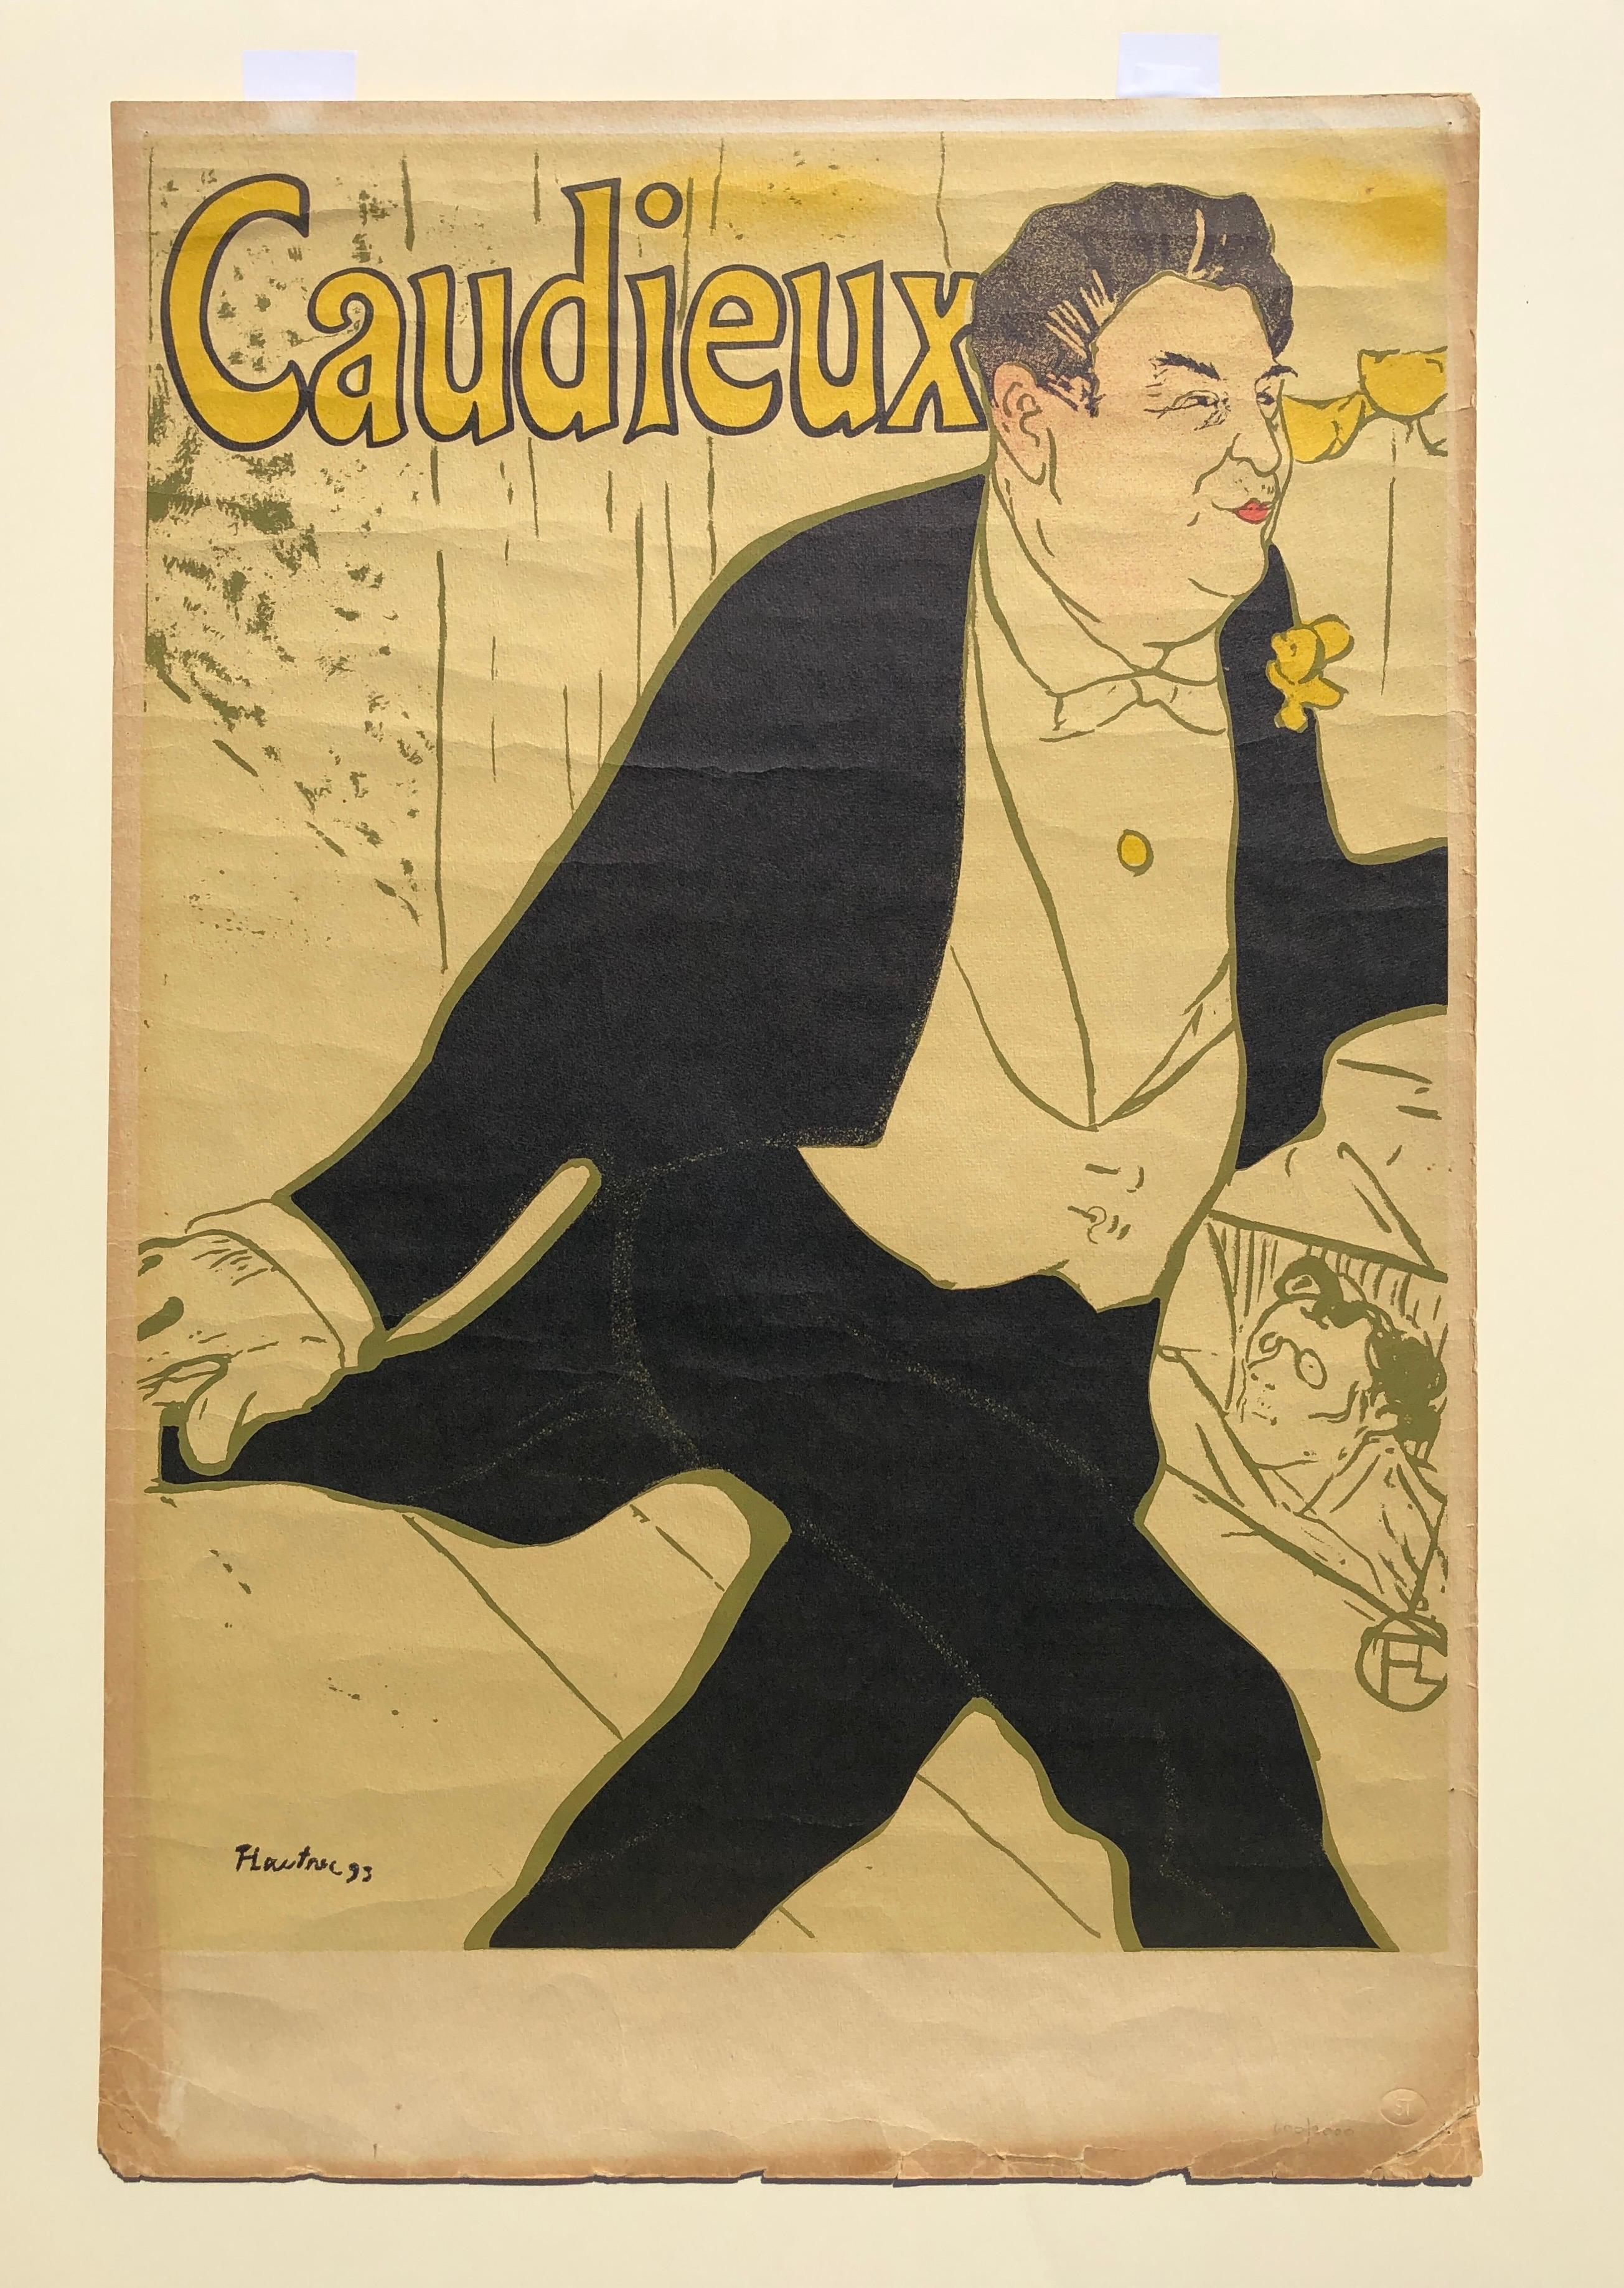 Cadieux - Vintage Art Nouveau Lithograph Poster by Toulouse Lautrec In Fair Condition For Sale In East Quogue, NY